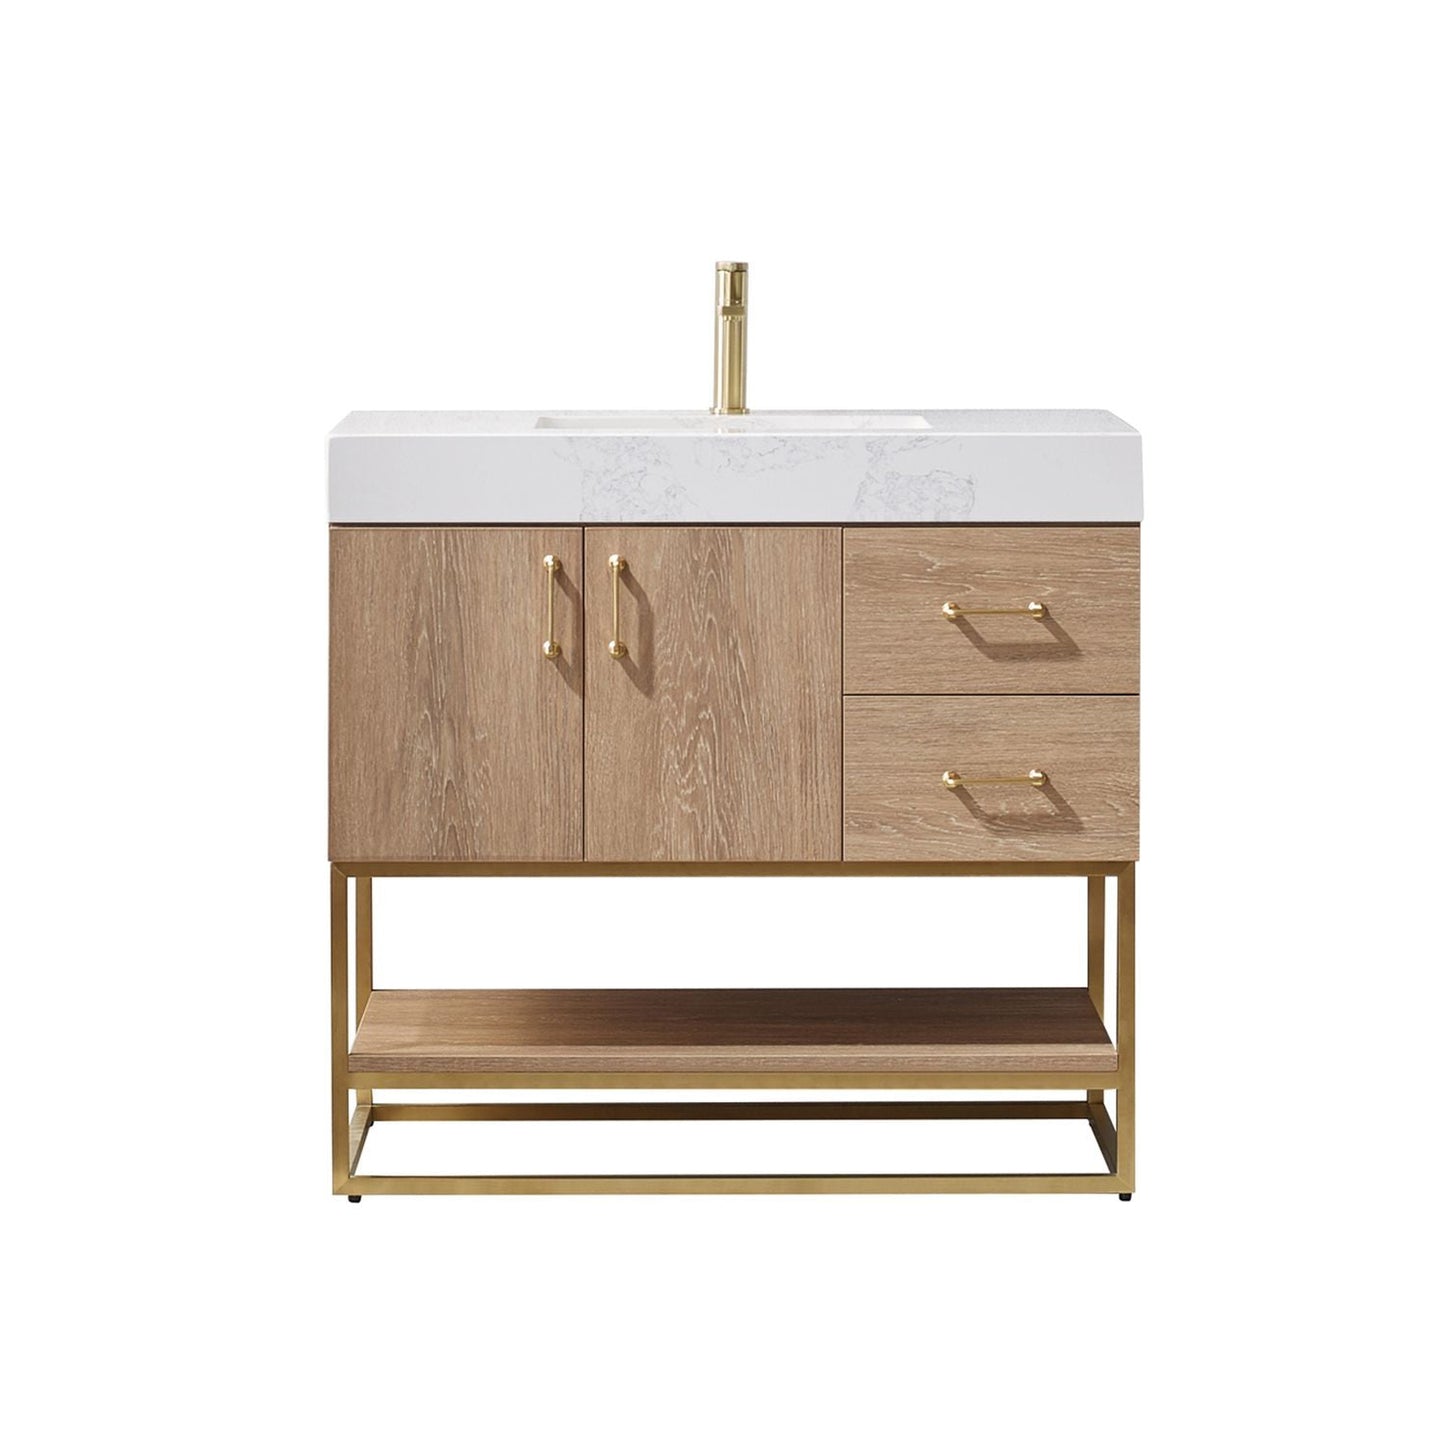 Vinnova Alistair 36" North American Oak Freestanding Single Vanity Set In Brushed Gold Metal Bracket Support Base and White Grain Stone Top With Undermount Ceramic Sink and Mirror